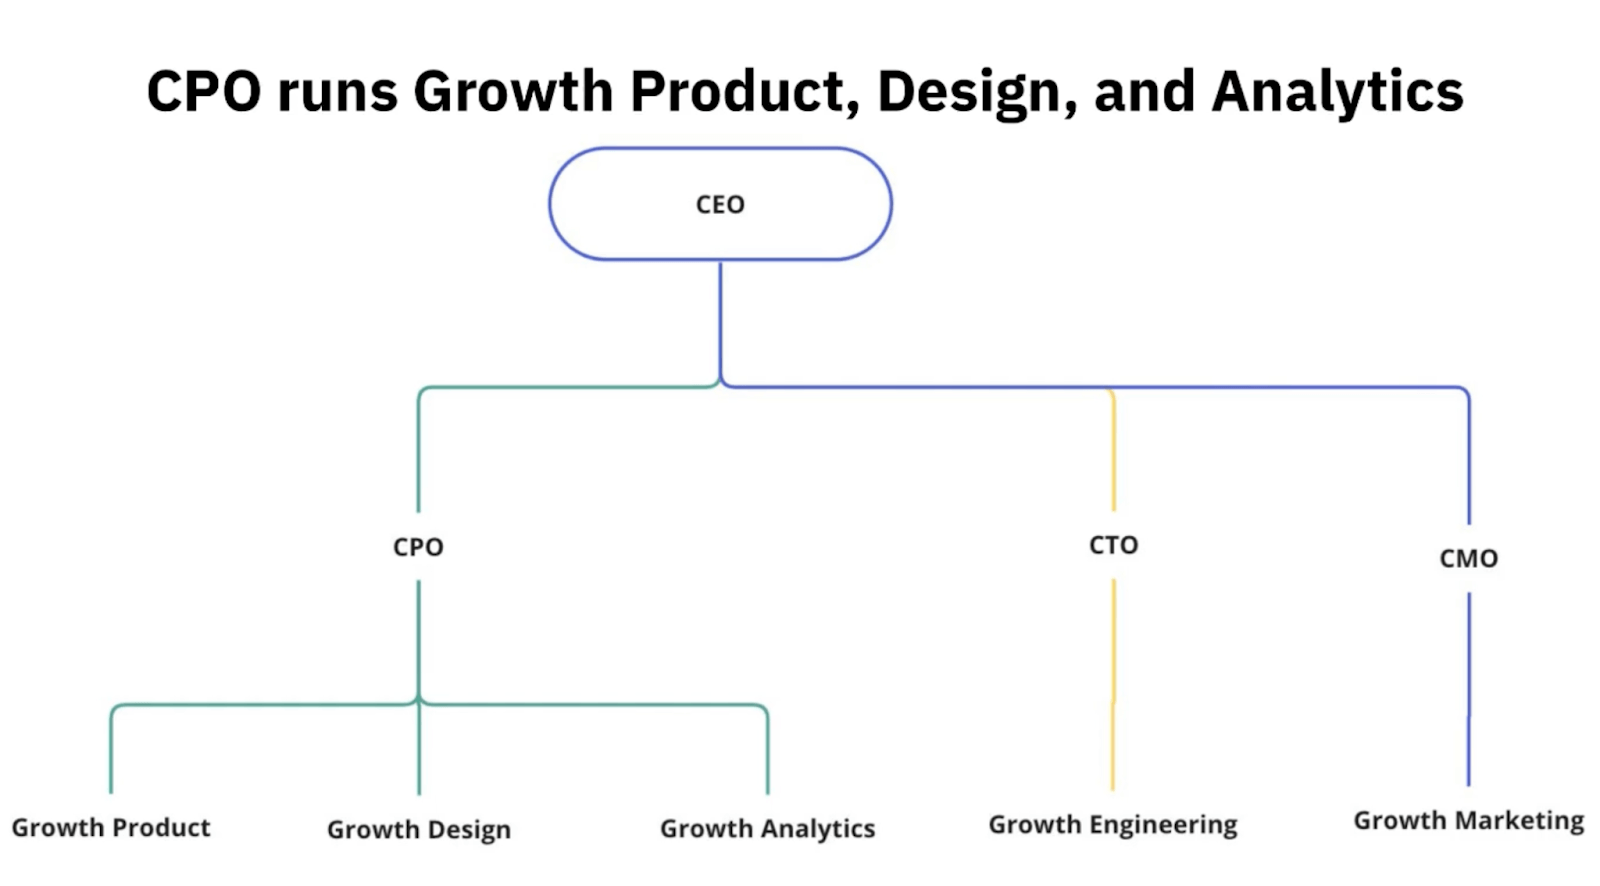 when the Chief Product Officer runs growth product, design, and analytics